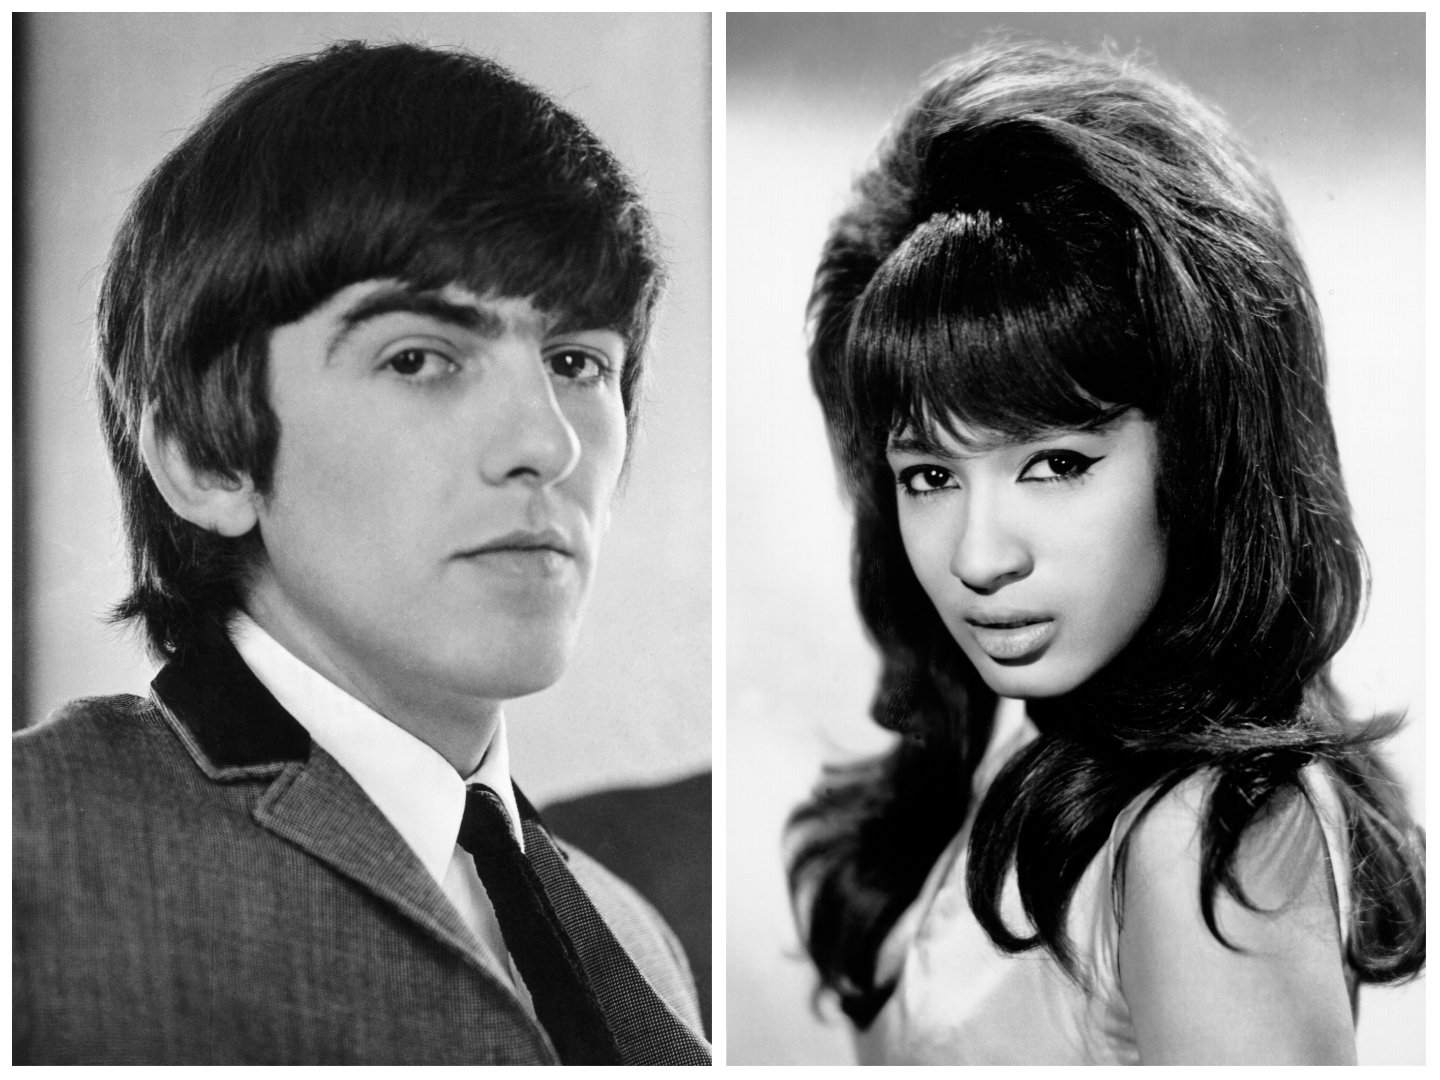 A black and white photo of George Harrison wearing a suit. Ronnie Spector wears a sleeveless dress.